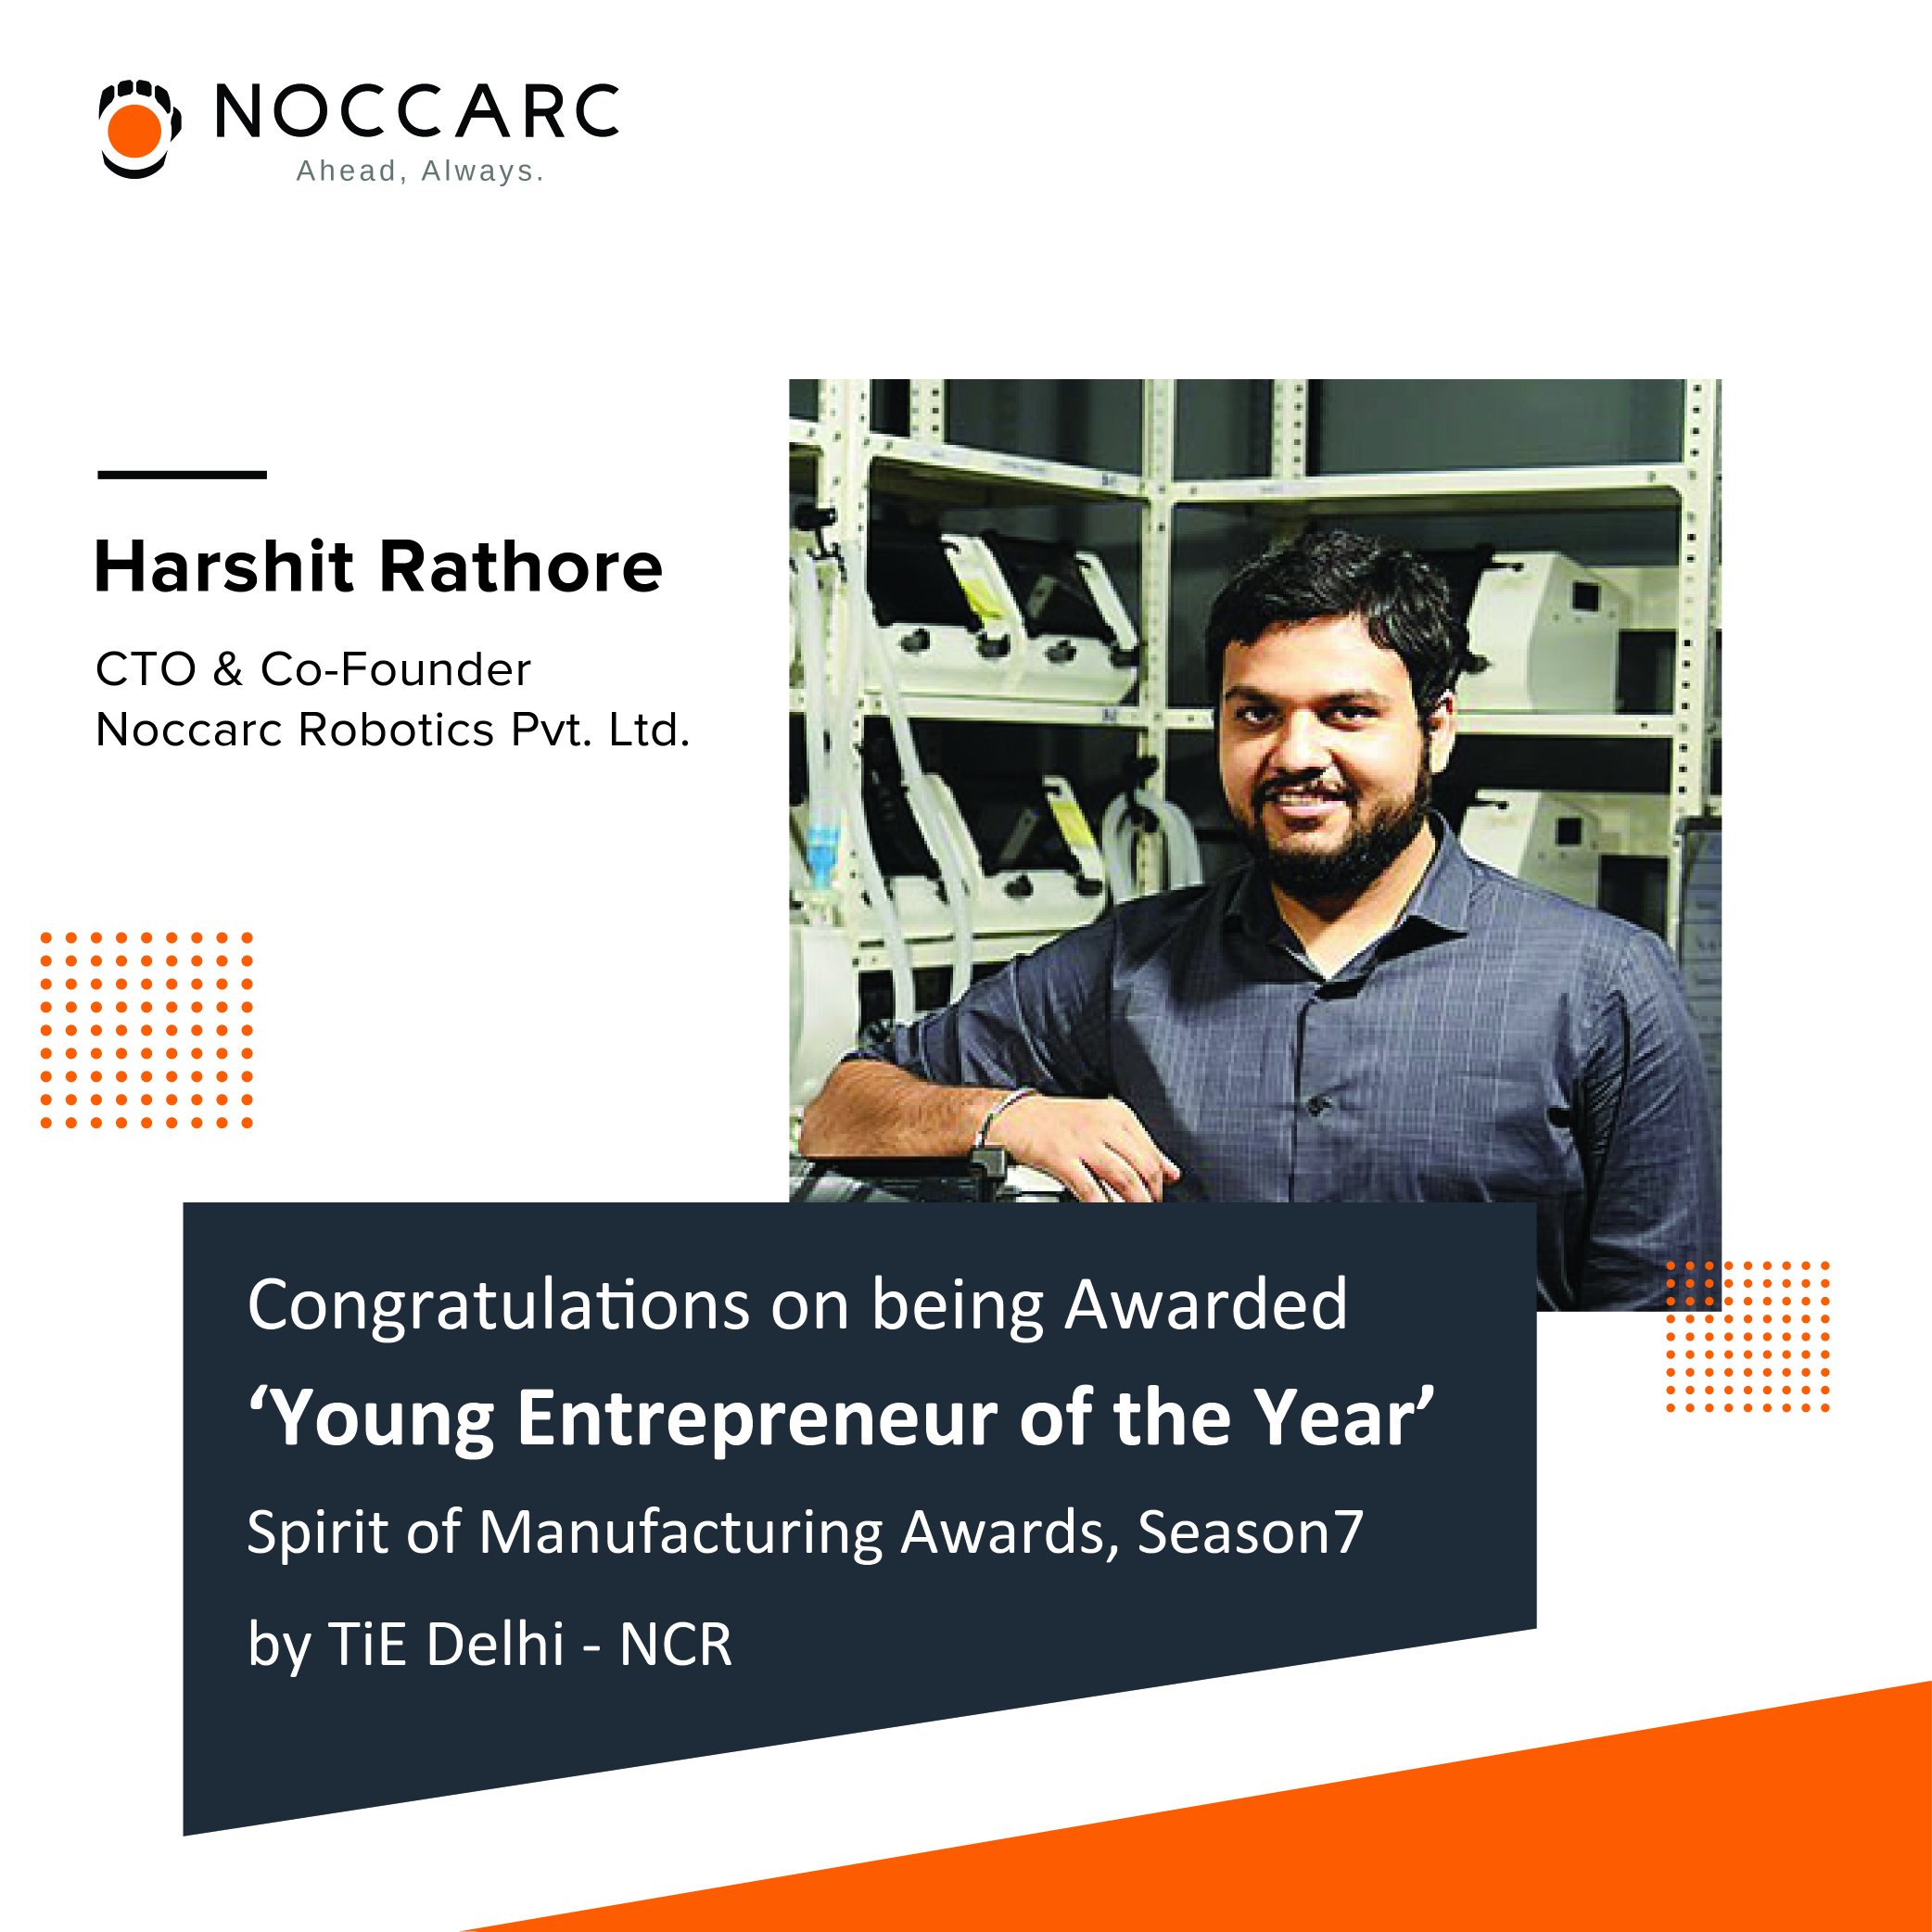 noccarc robotics on twitter: "we are delighted to share that @harshitr2, #cto & #cofounder, @noccarc has been #awarded "young entrepreneur of the year"- @spiritofmanufac awards, by @tiedelhi the #award is aligned with